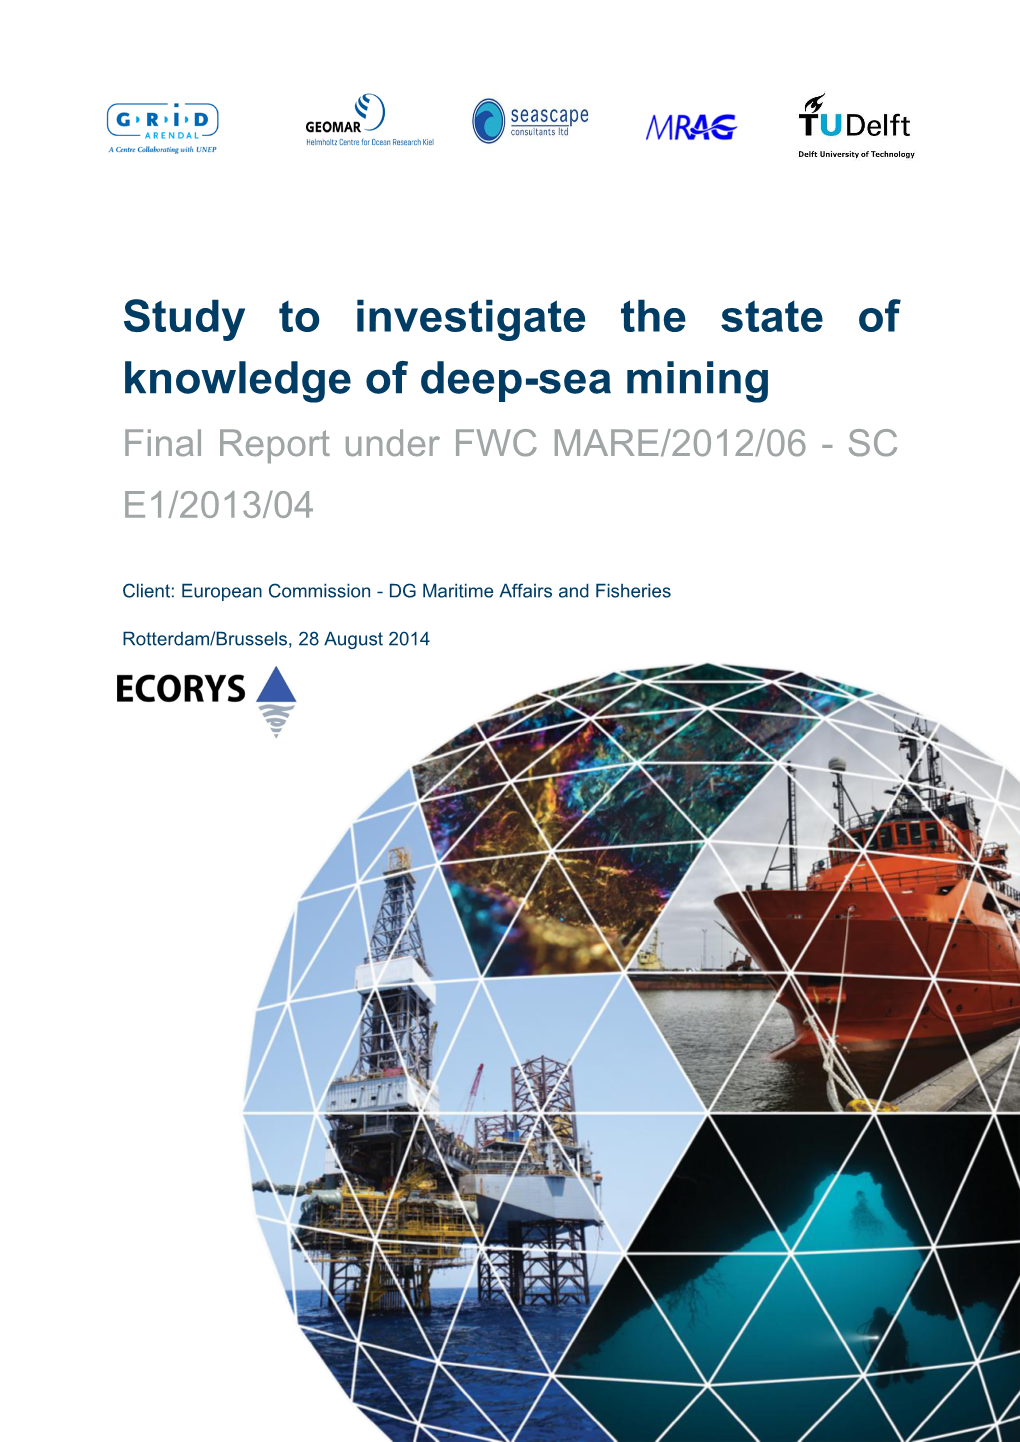 Study to Investigate State of Knowledge of Deep Sea Mining